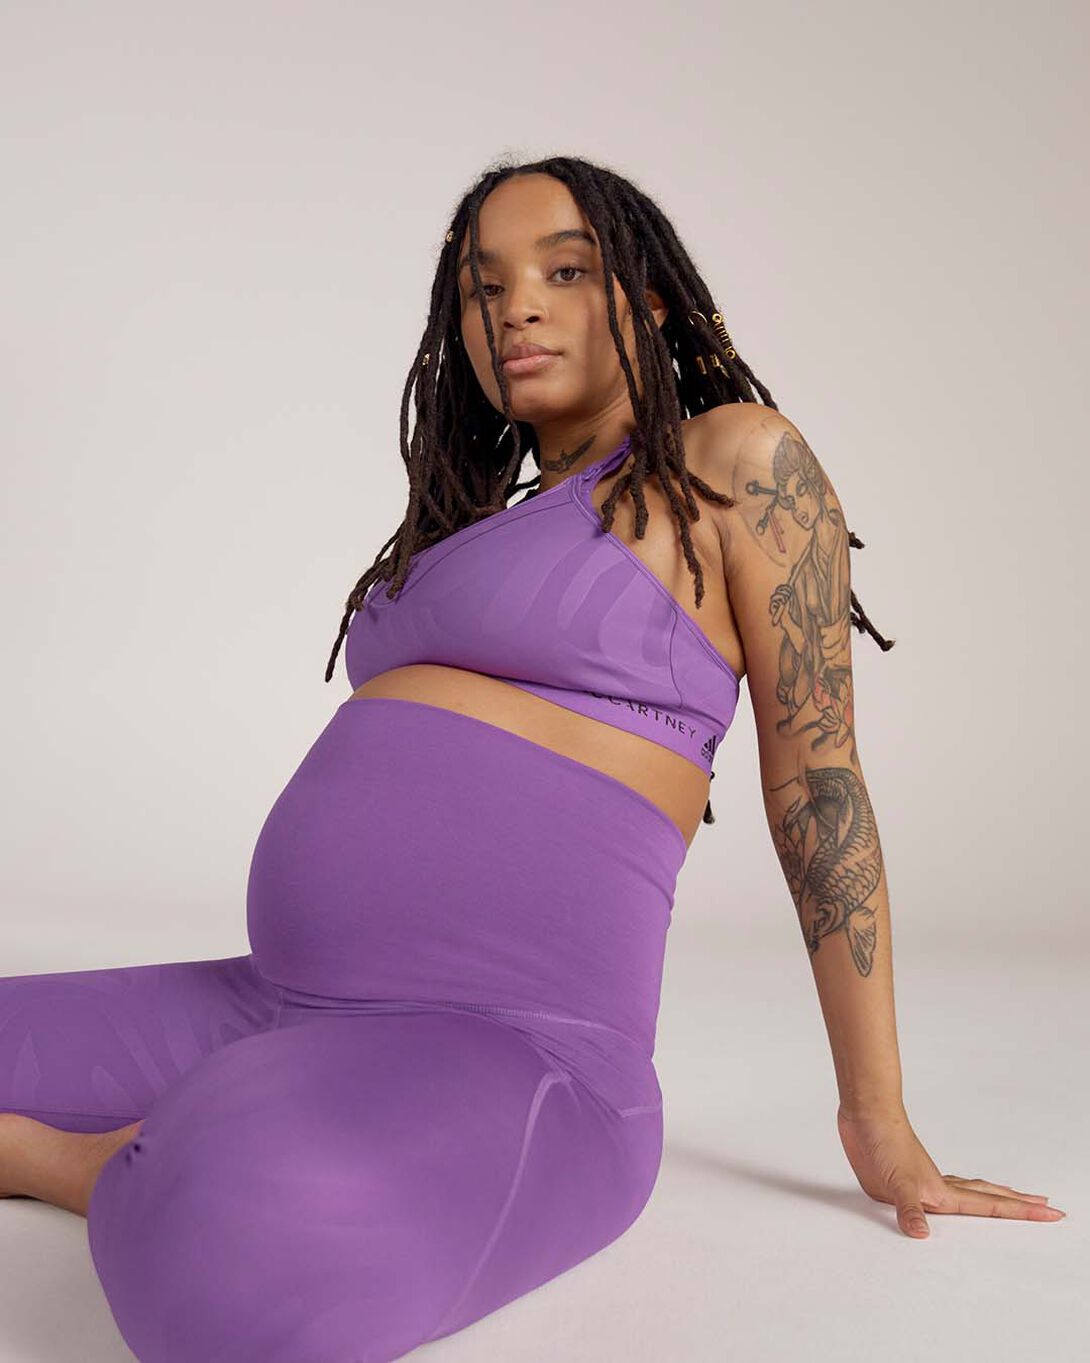 Introducing the first adidas by Stella McCartney Maternity collection